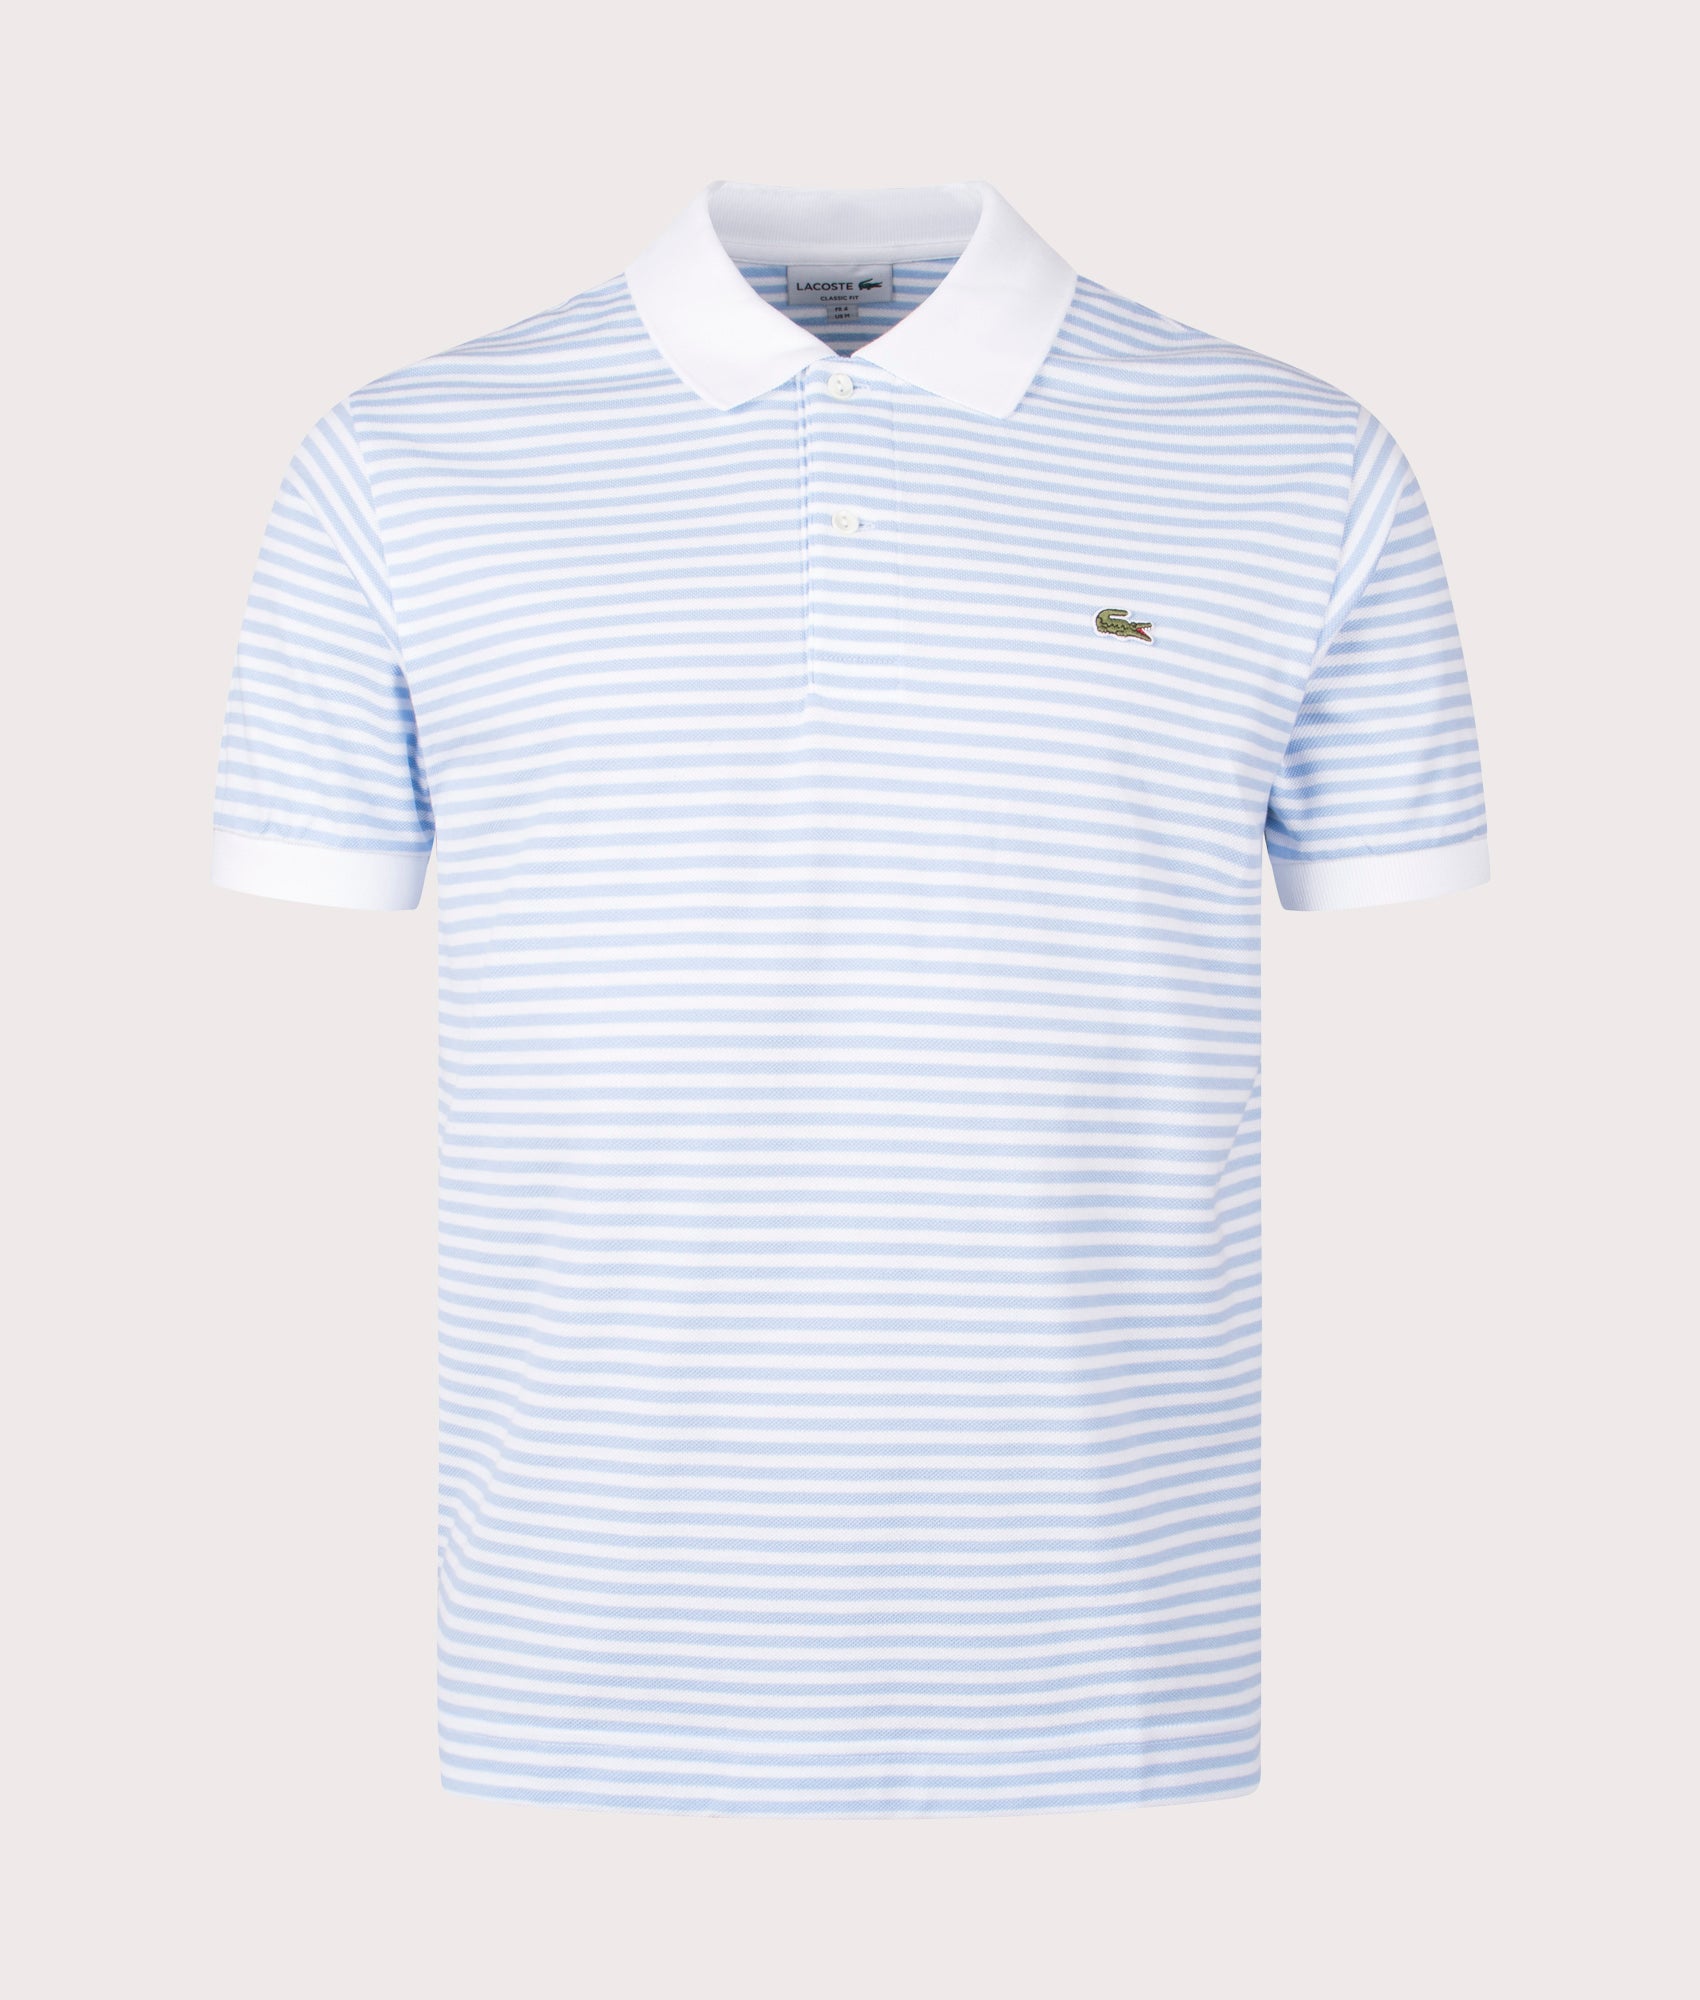 Lacoste Mens Ribbed Collar Striped Polo Shirt - Colour: F6Z White/Overview - Size: 7/3XL